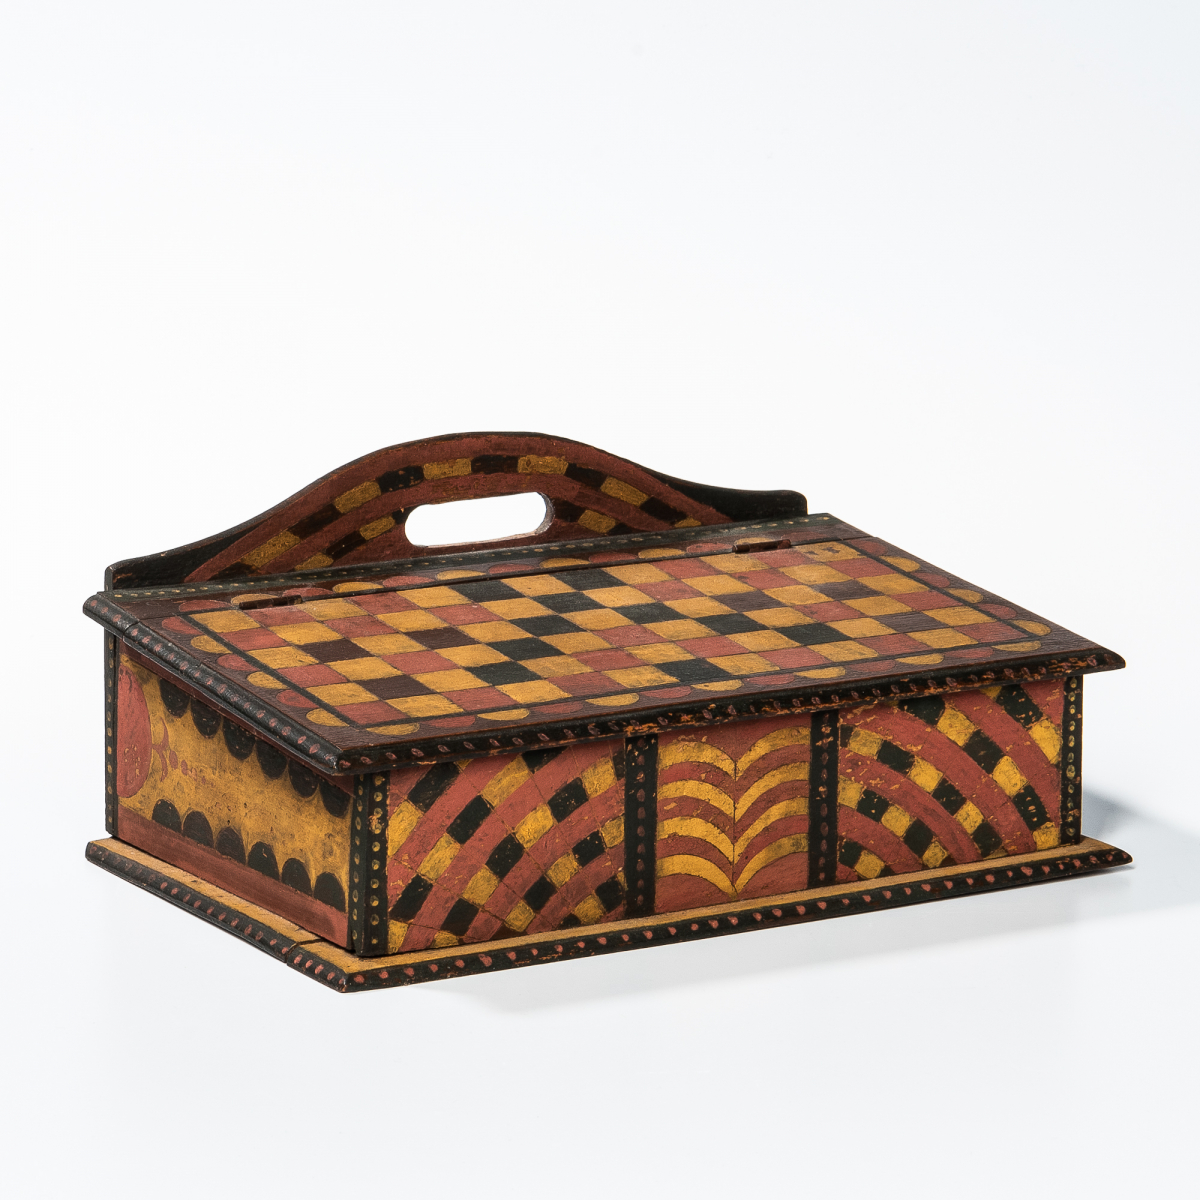 Paint-decorated Slant-lid Box Attributed to the Checkerboard Artist, probably Somerset County, Pennsylvania, second quarter 19th century